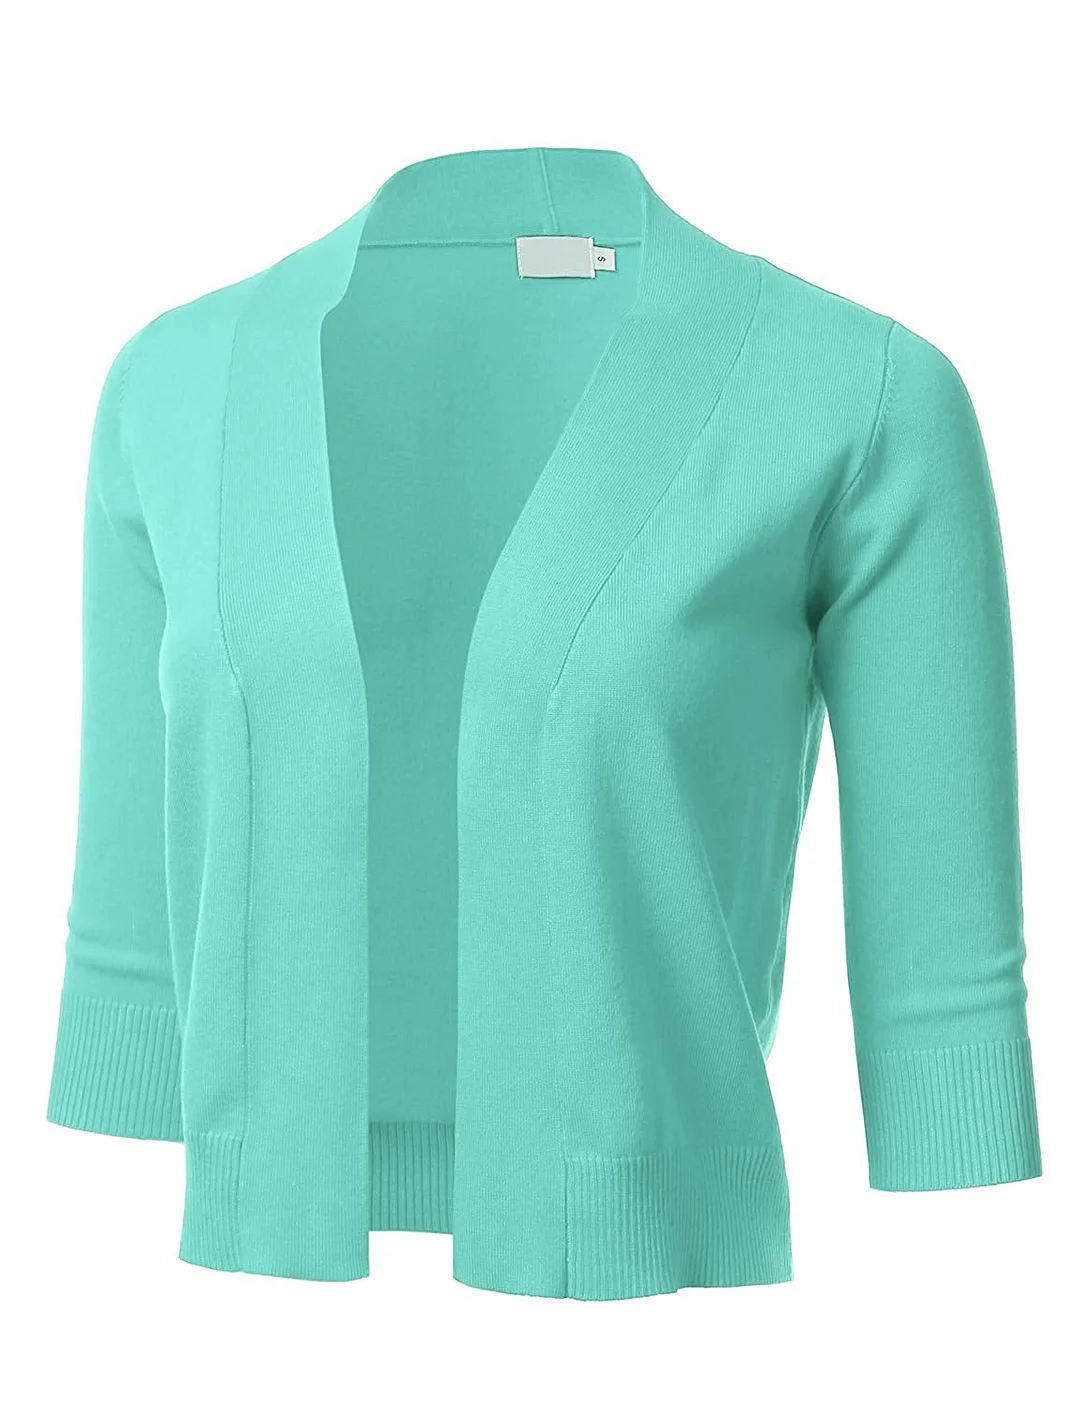 Women's Classic 3/4 Sleeve Open Front Cropped Cardigan (S-3XL)